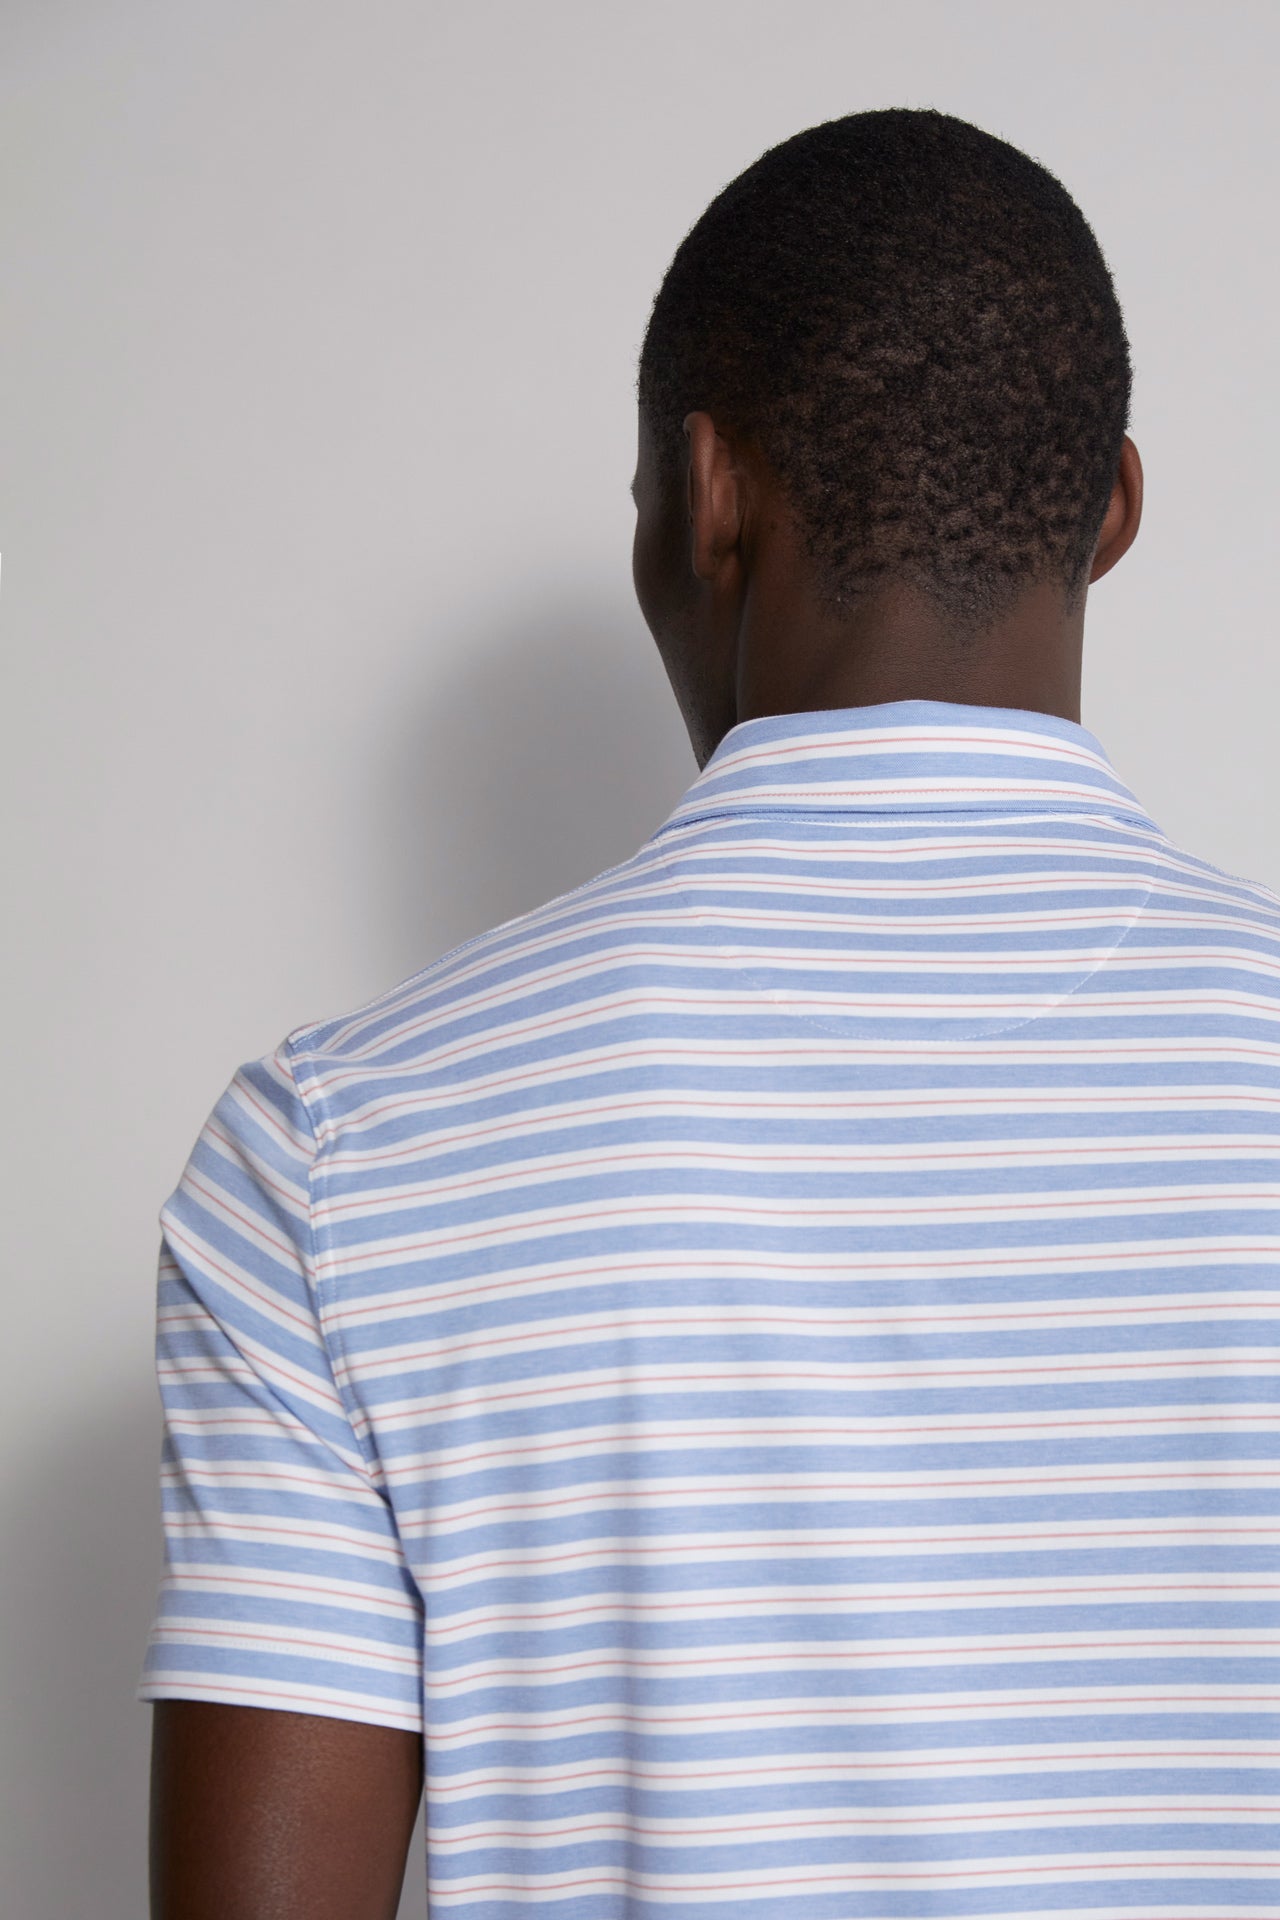 men's striped polo t-shirt grey and white - back detail